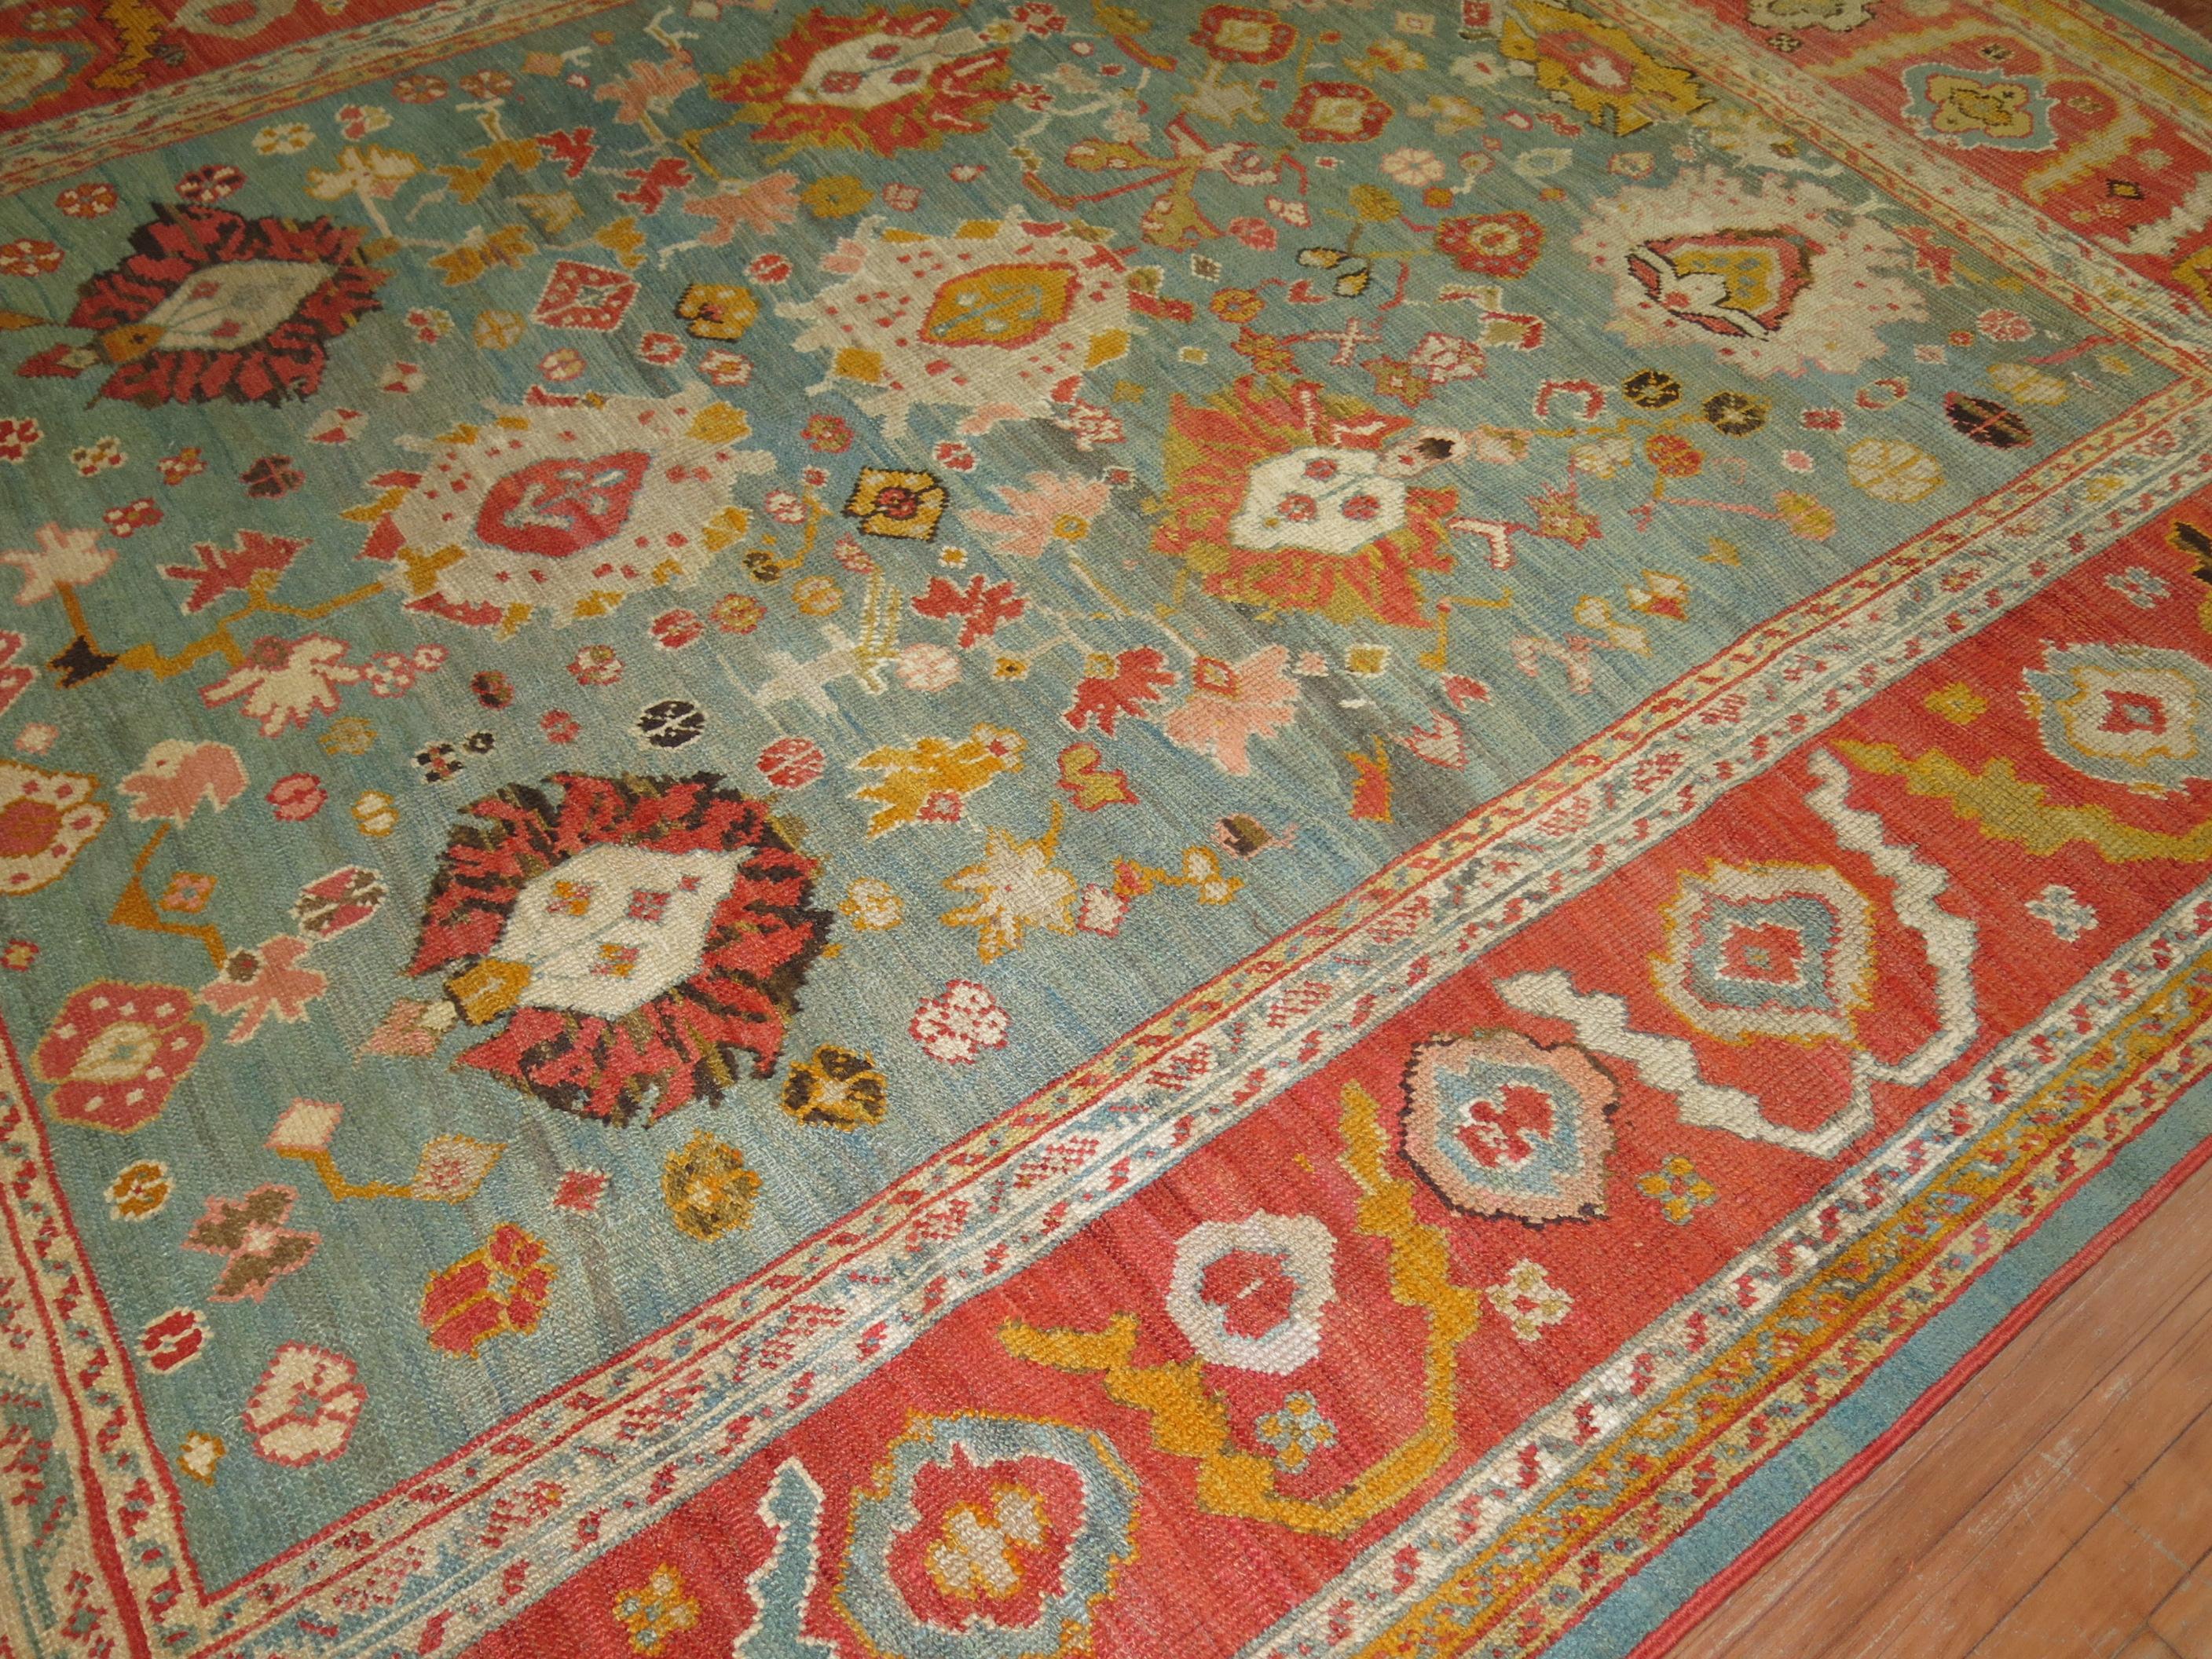 An exhilarating room size early 20th century antique turkish oushak rug with a vivid green field and orangy red border.

8'10'' x 11'2''